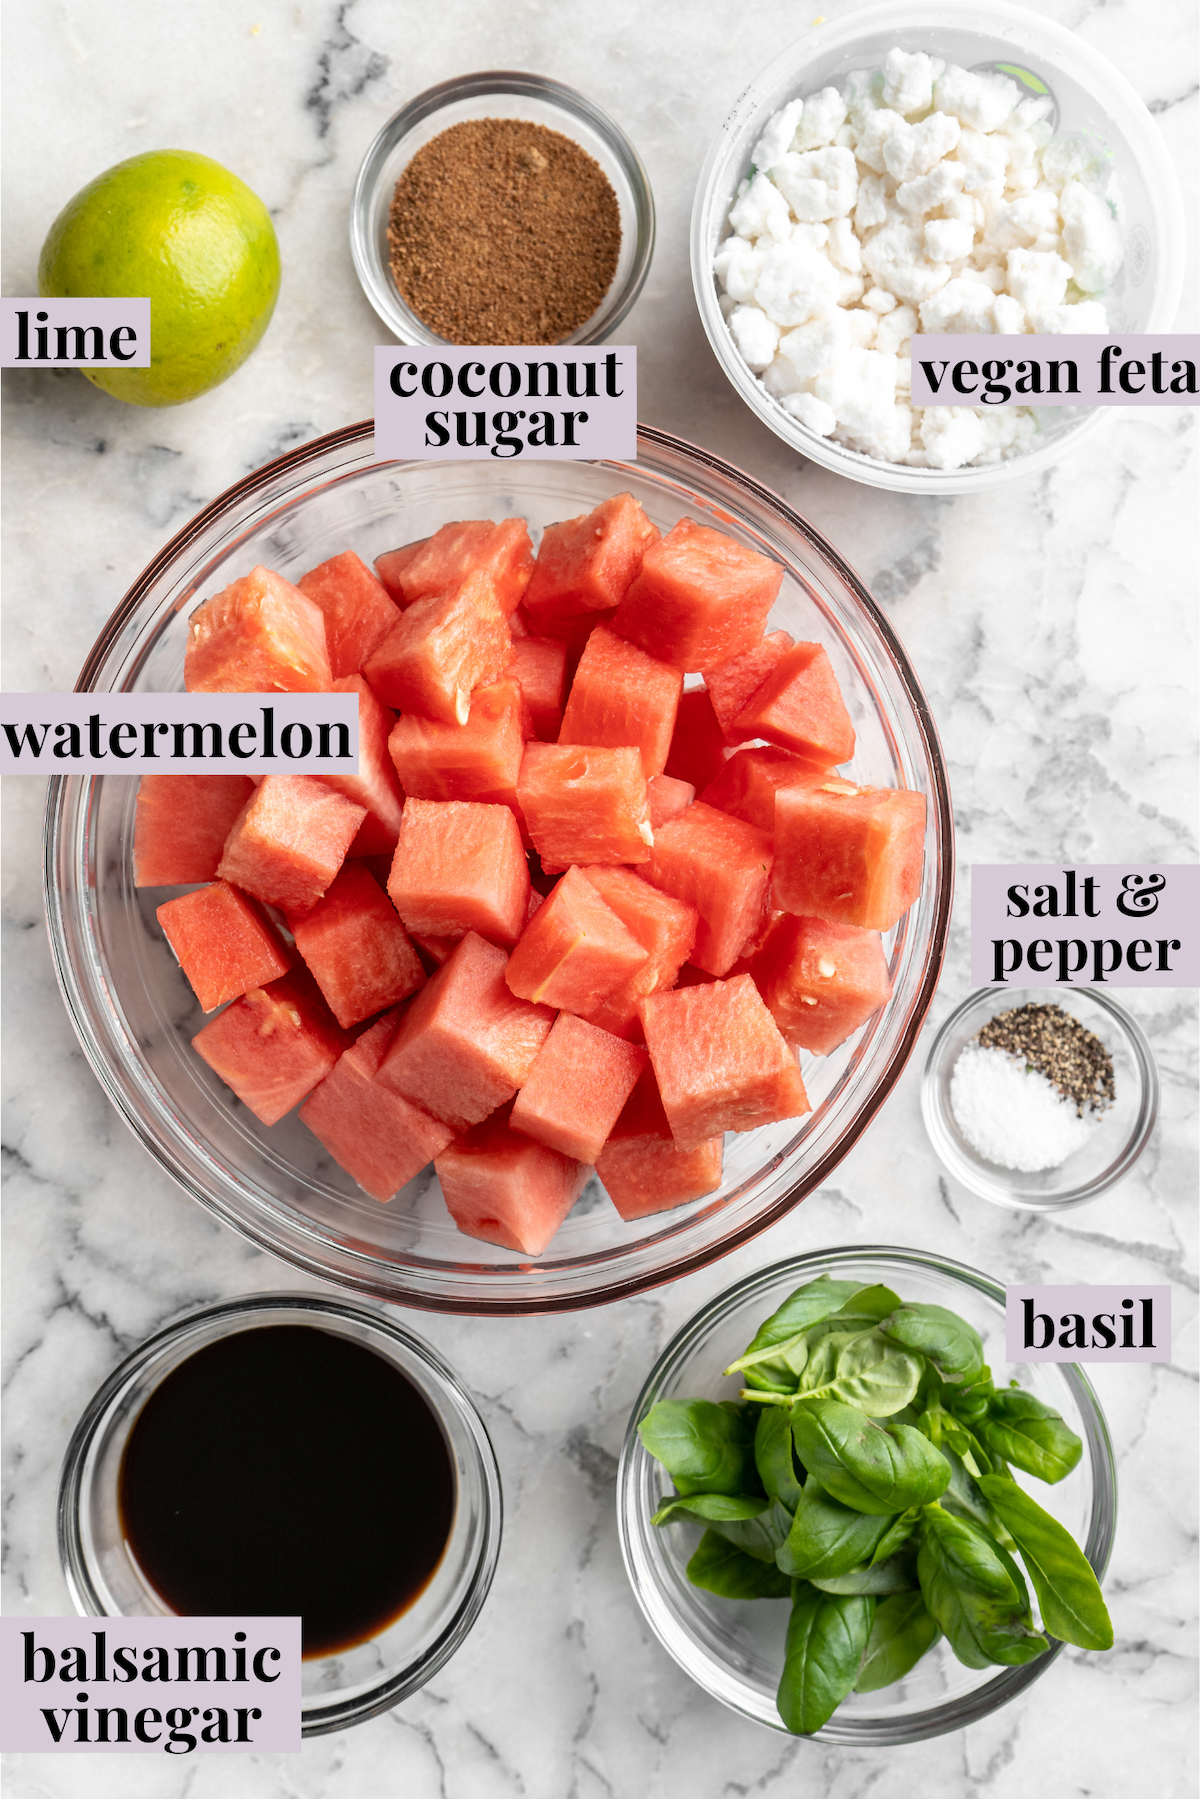 Overhead view of ingredients for vegan watermelon feta salad with labels